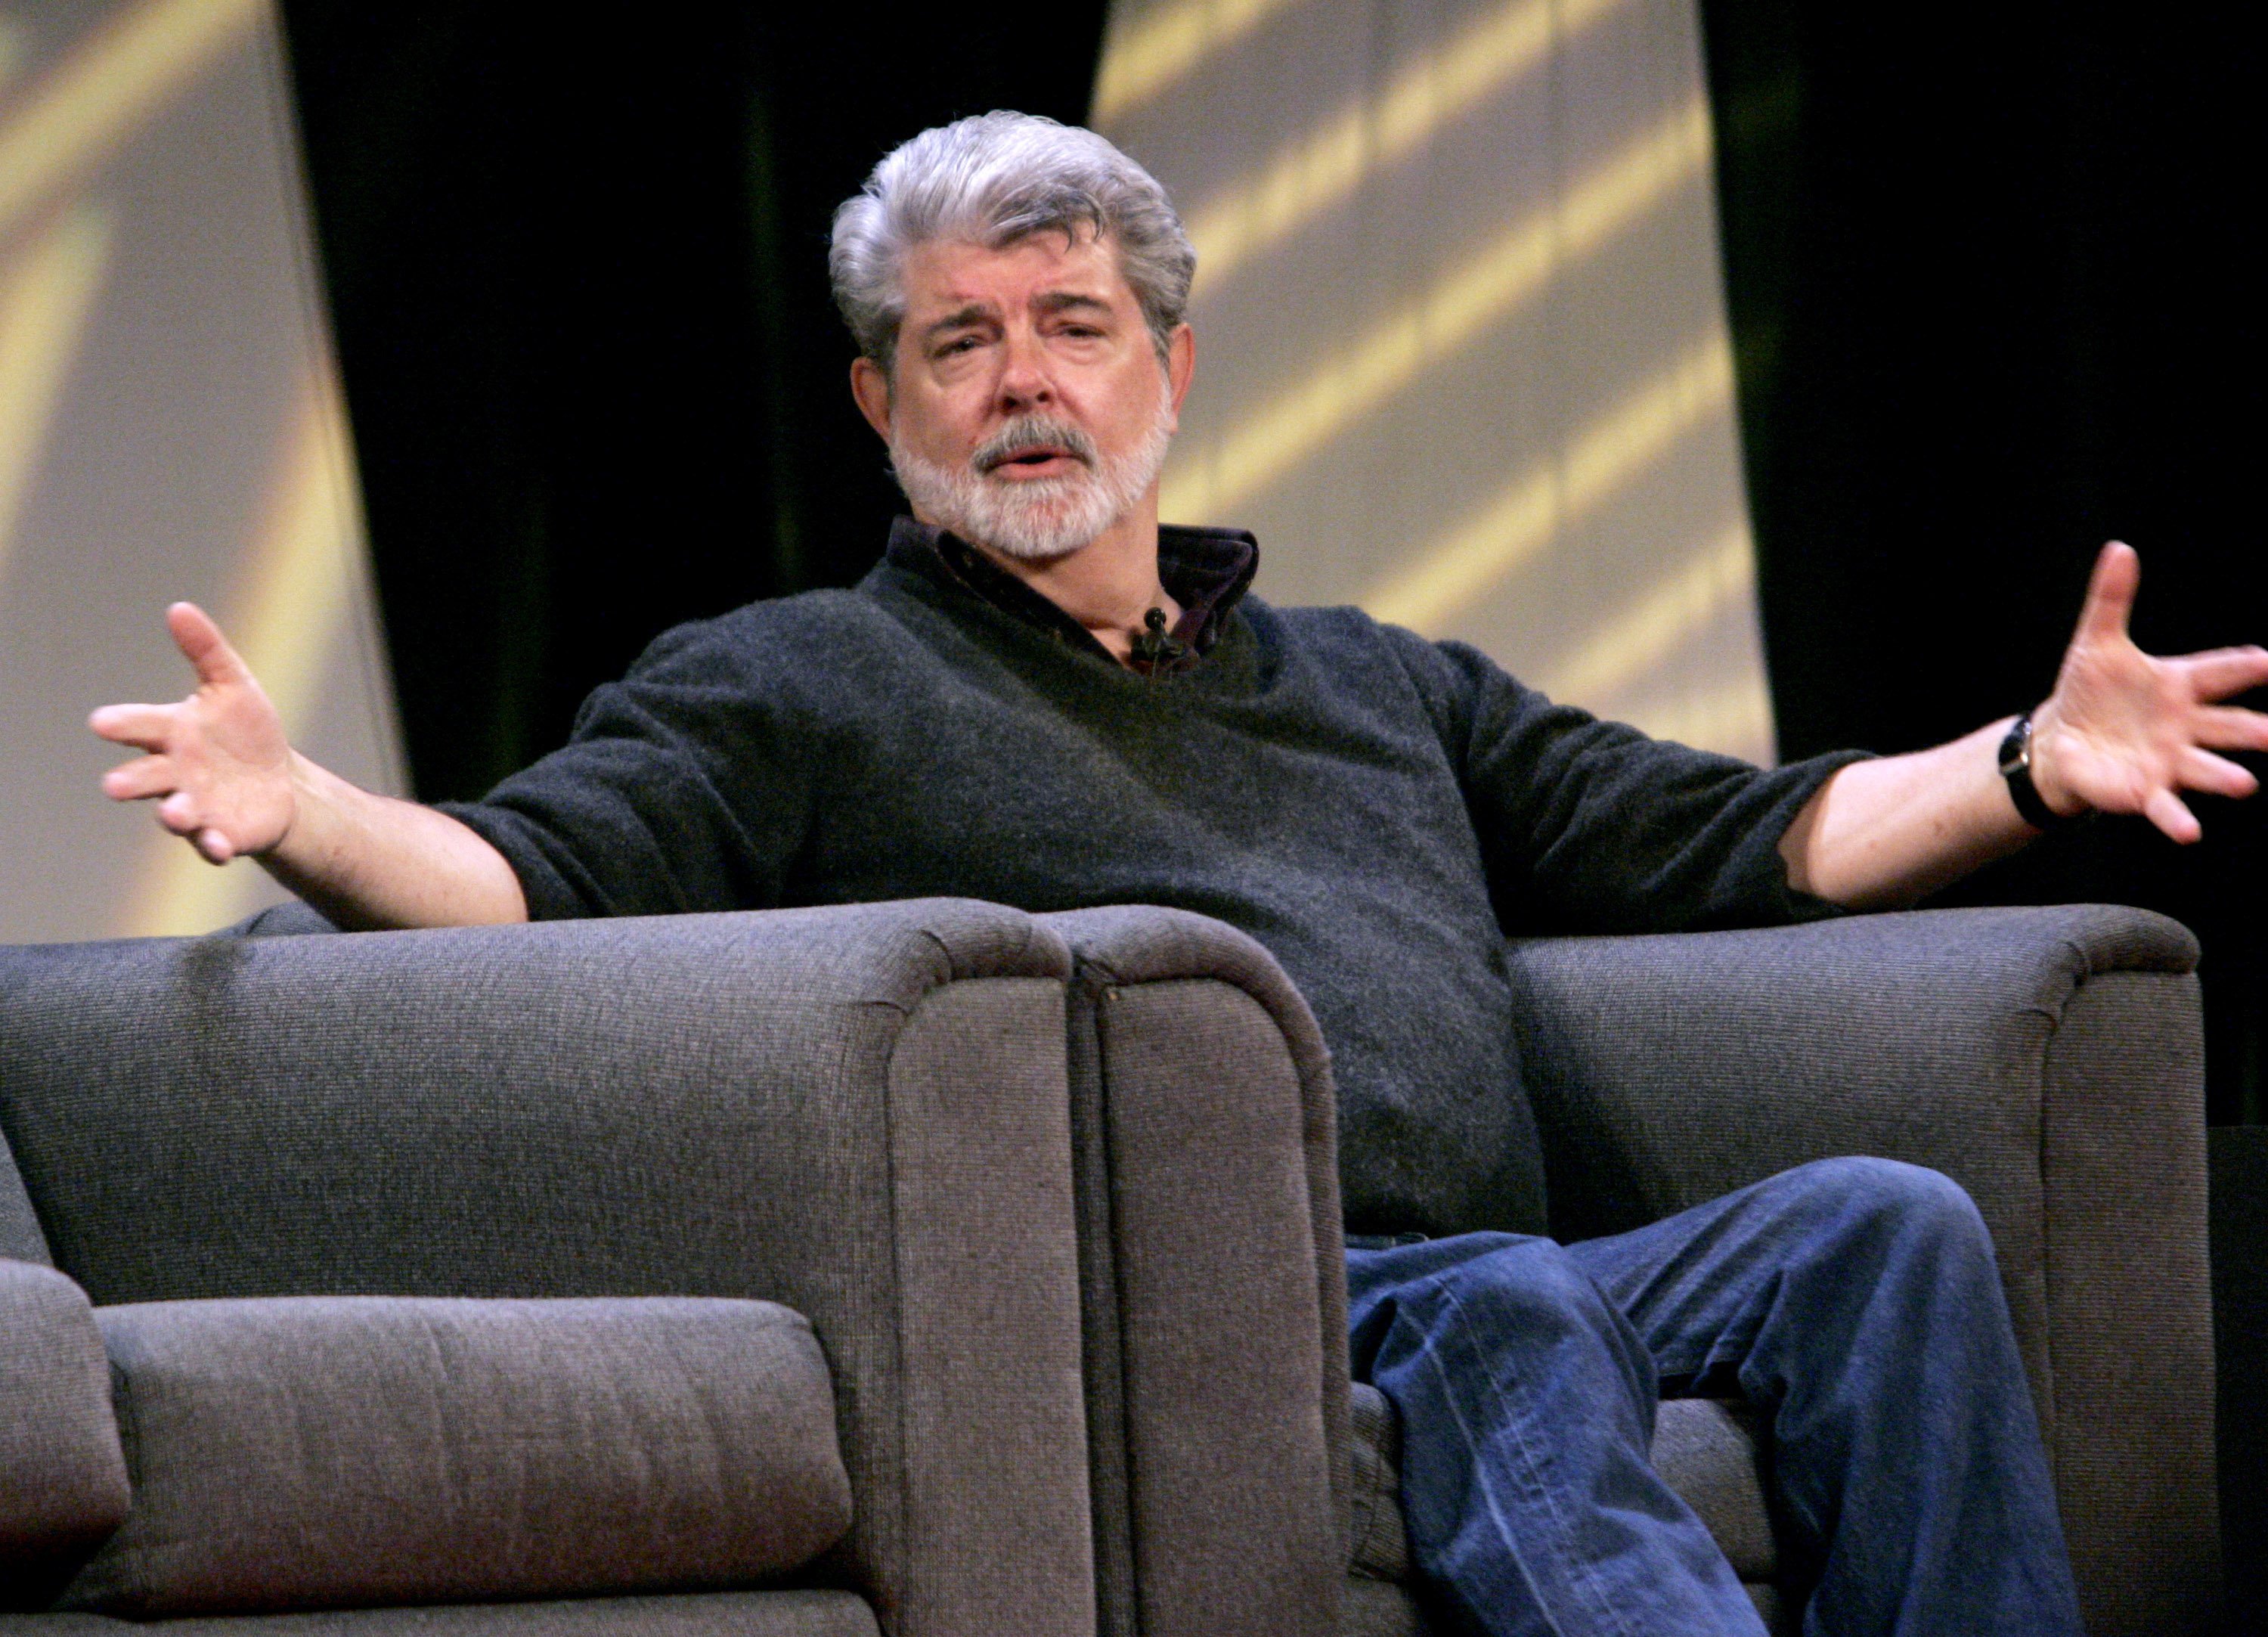 George Lucas on a couch